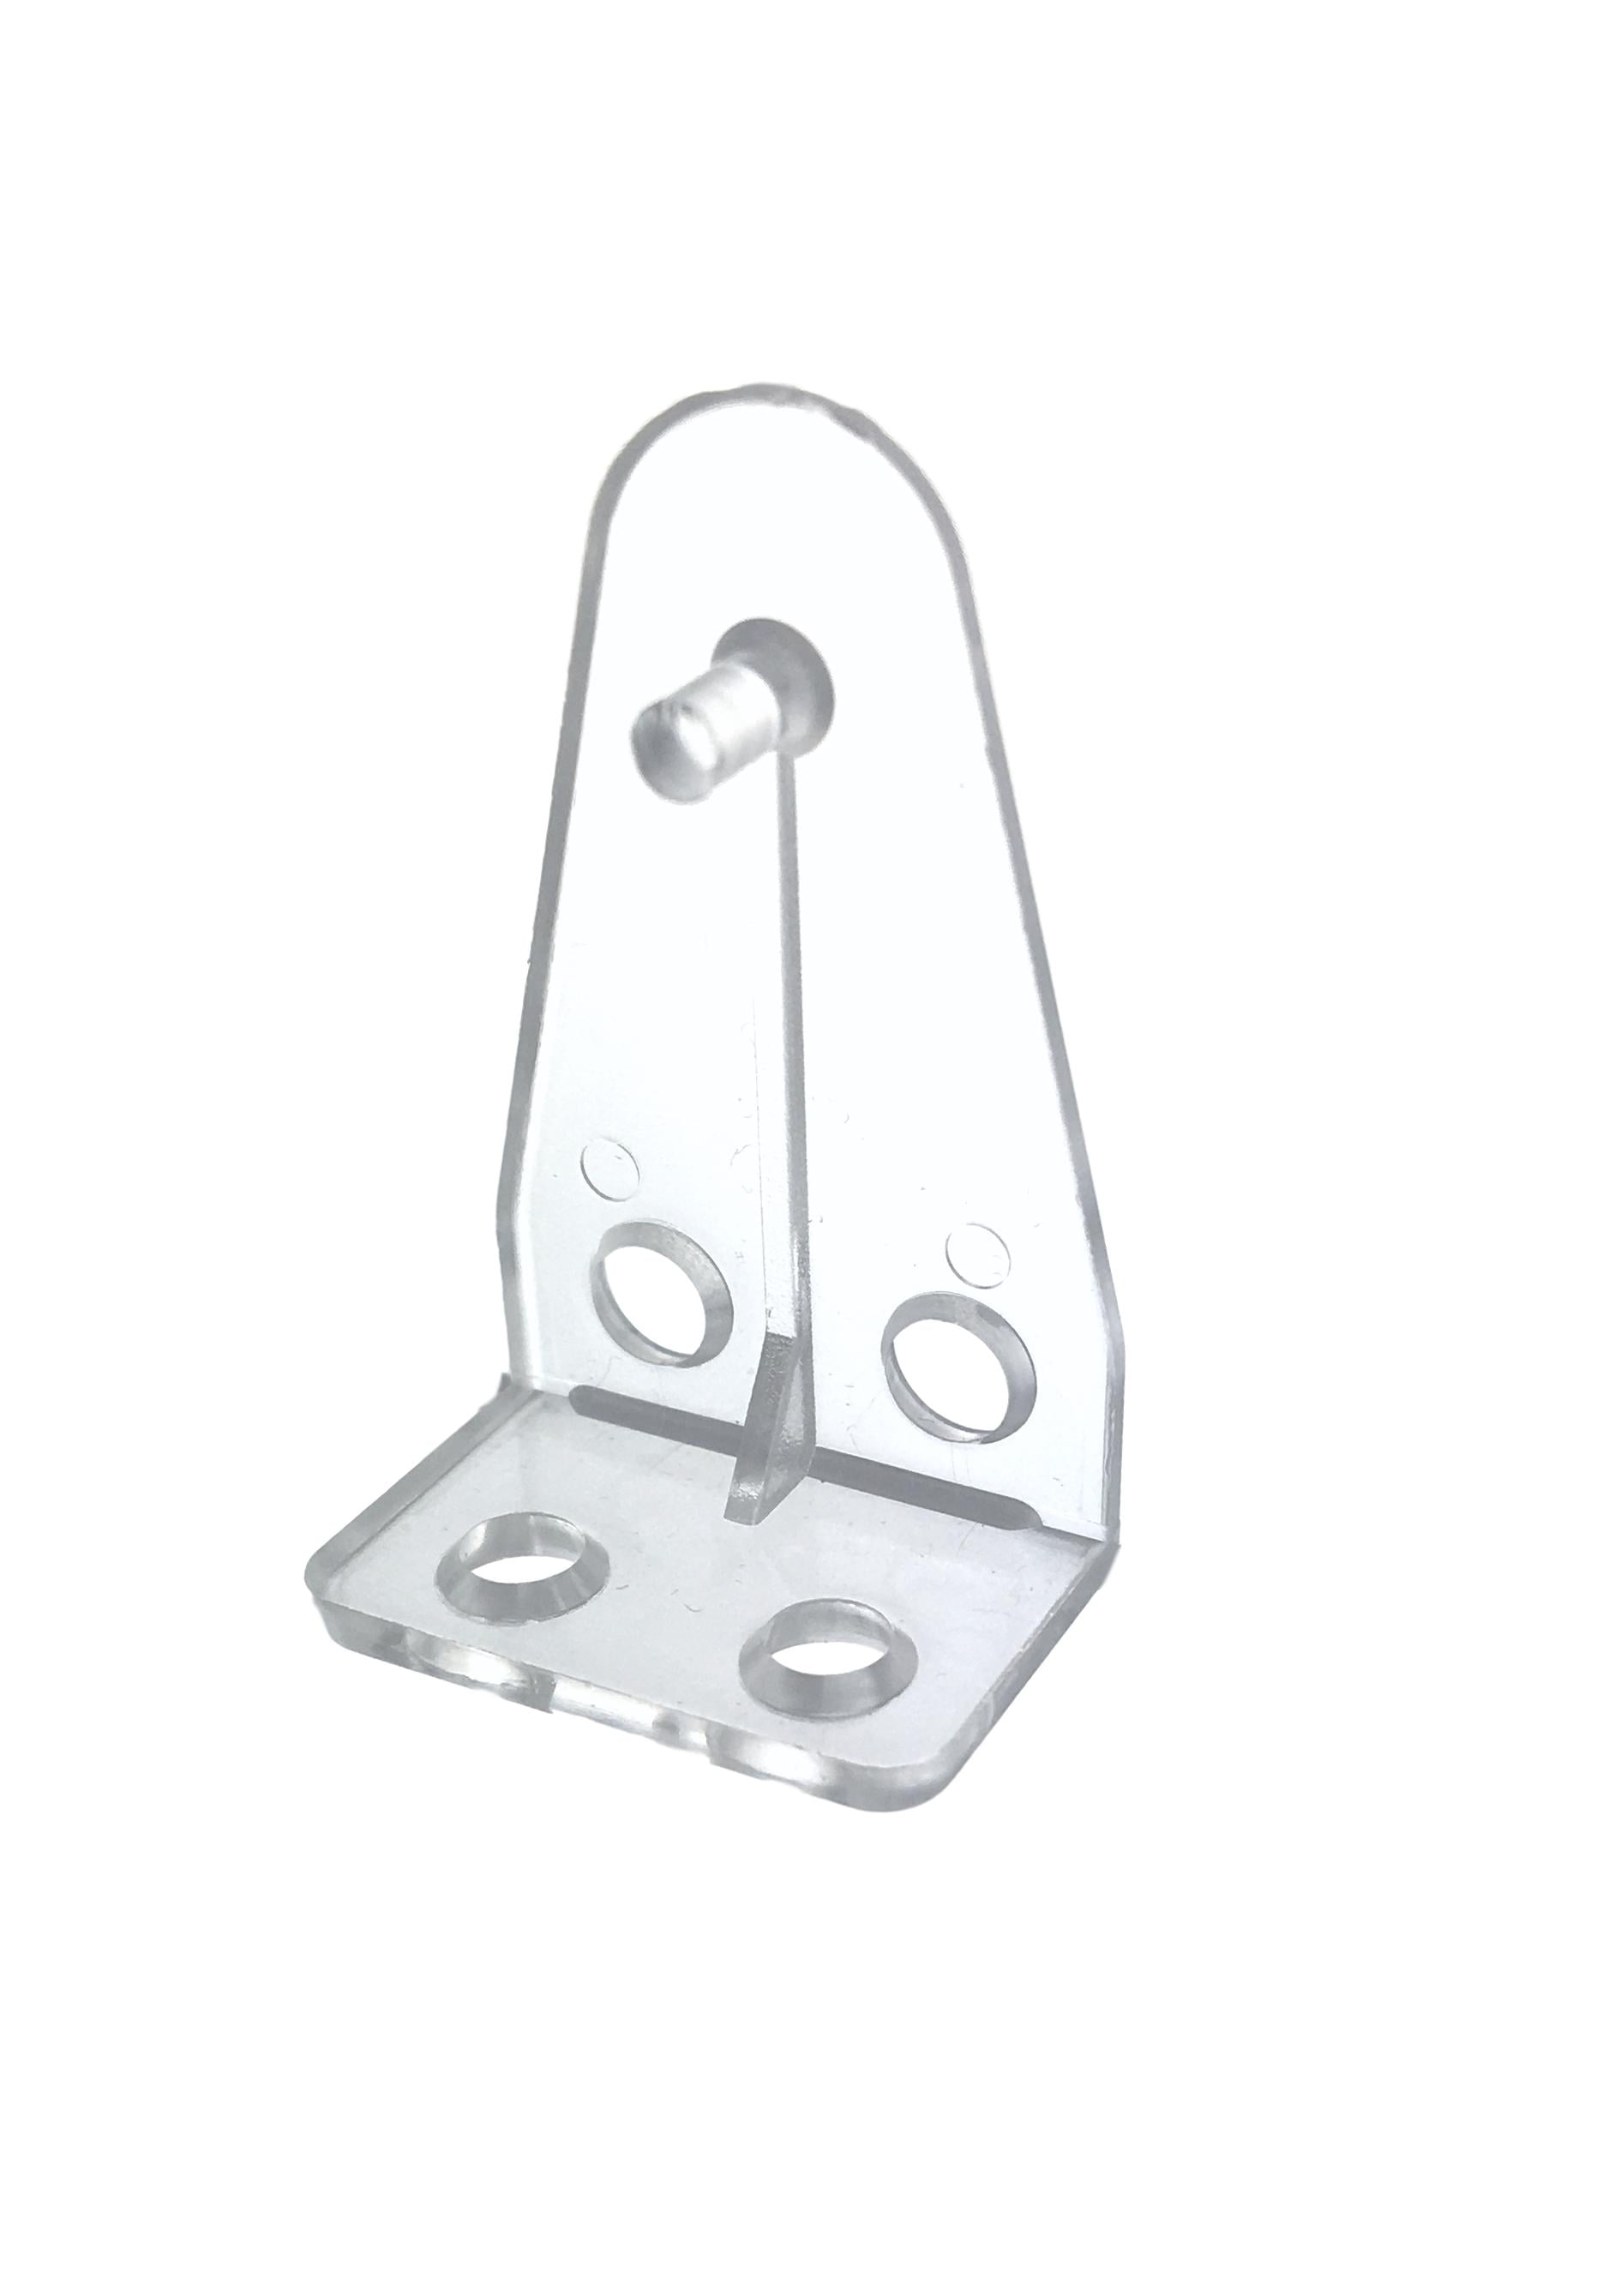 NEW CLEAR.DOOR,FRAME,SILL,SAFETY CHAIN /CORD TIDY FOR ANY BLIND FREE P&P 